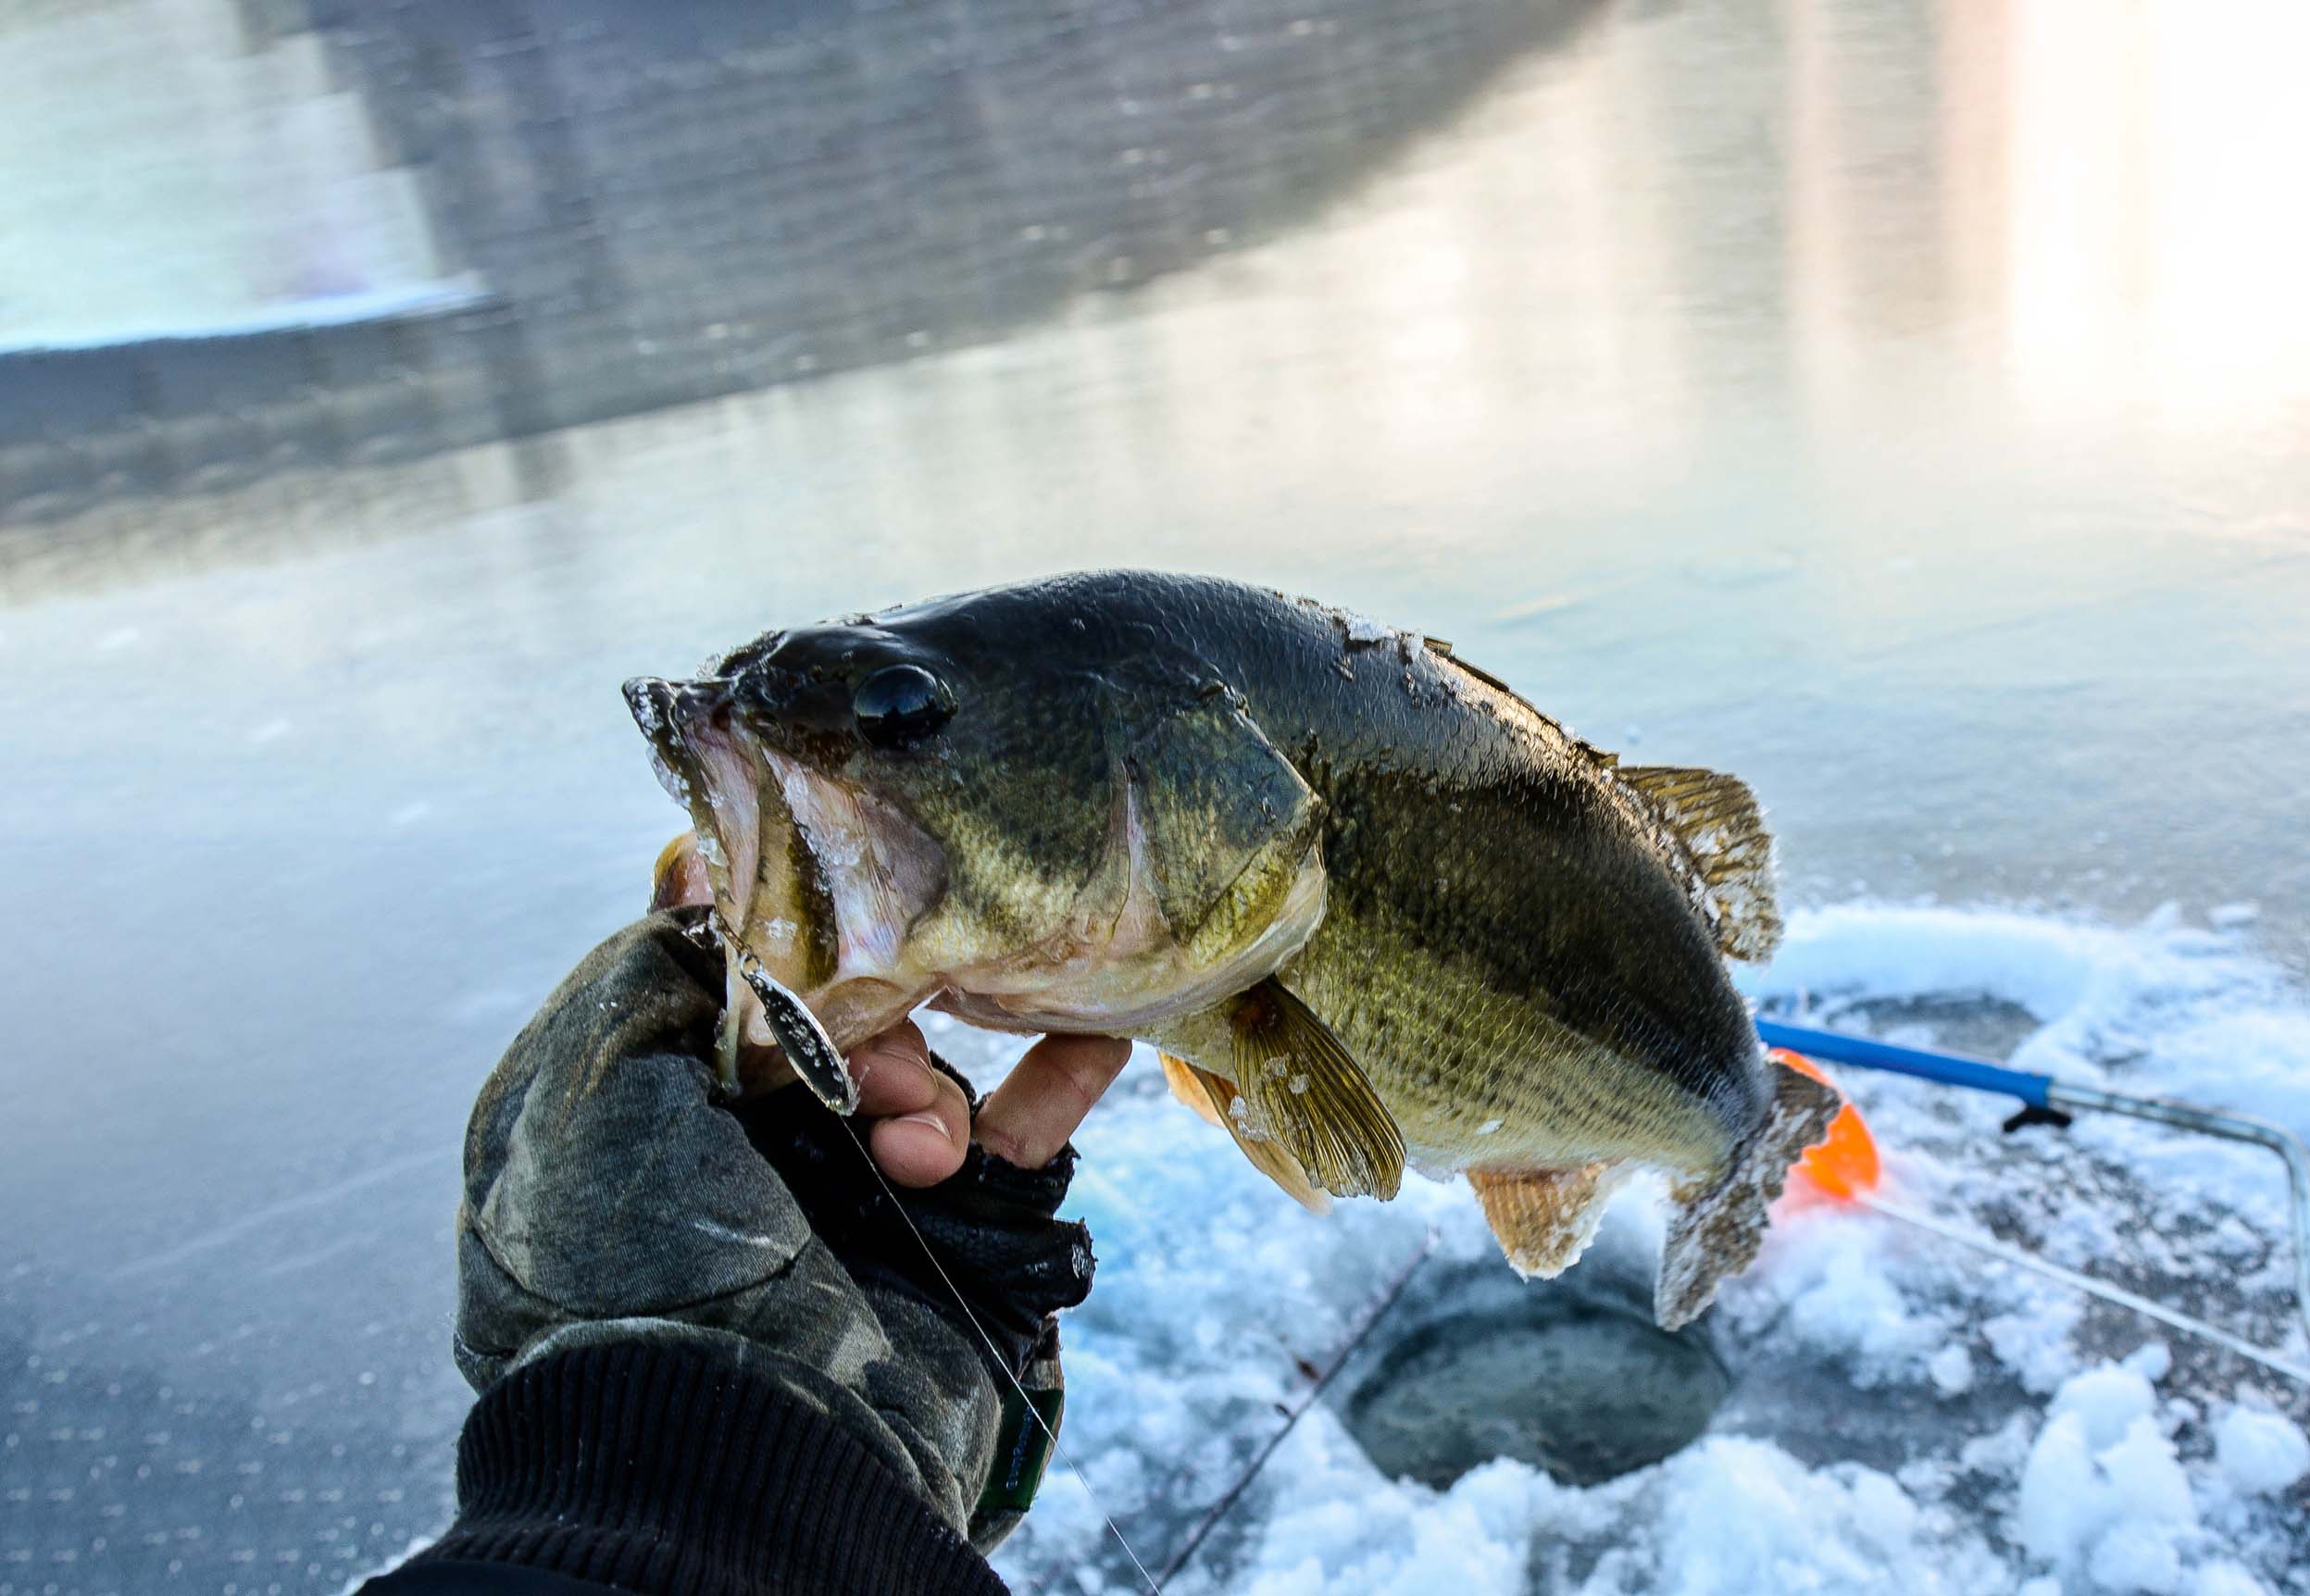 A hand pulls a gaping bass out of a hole in the ice.